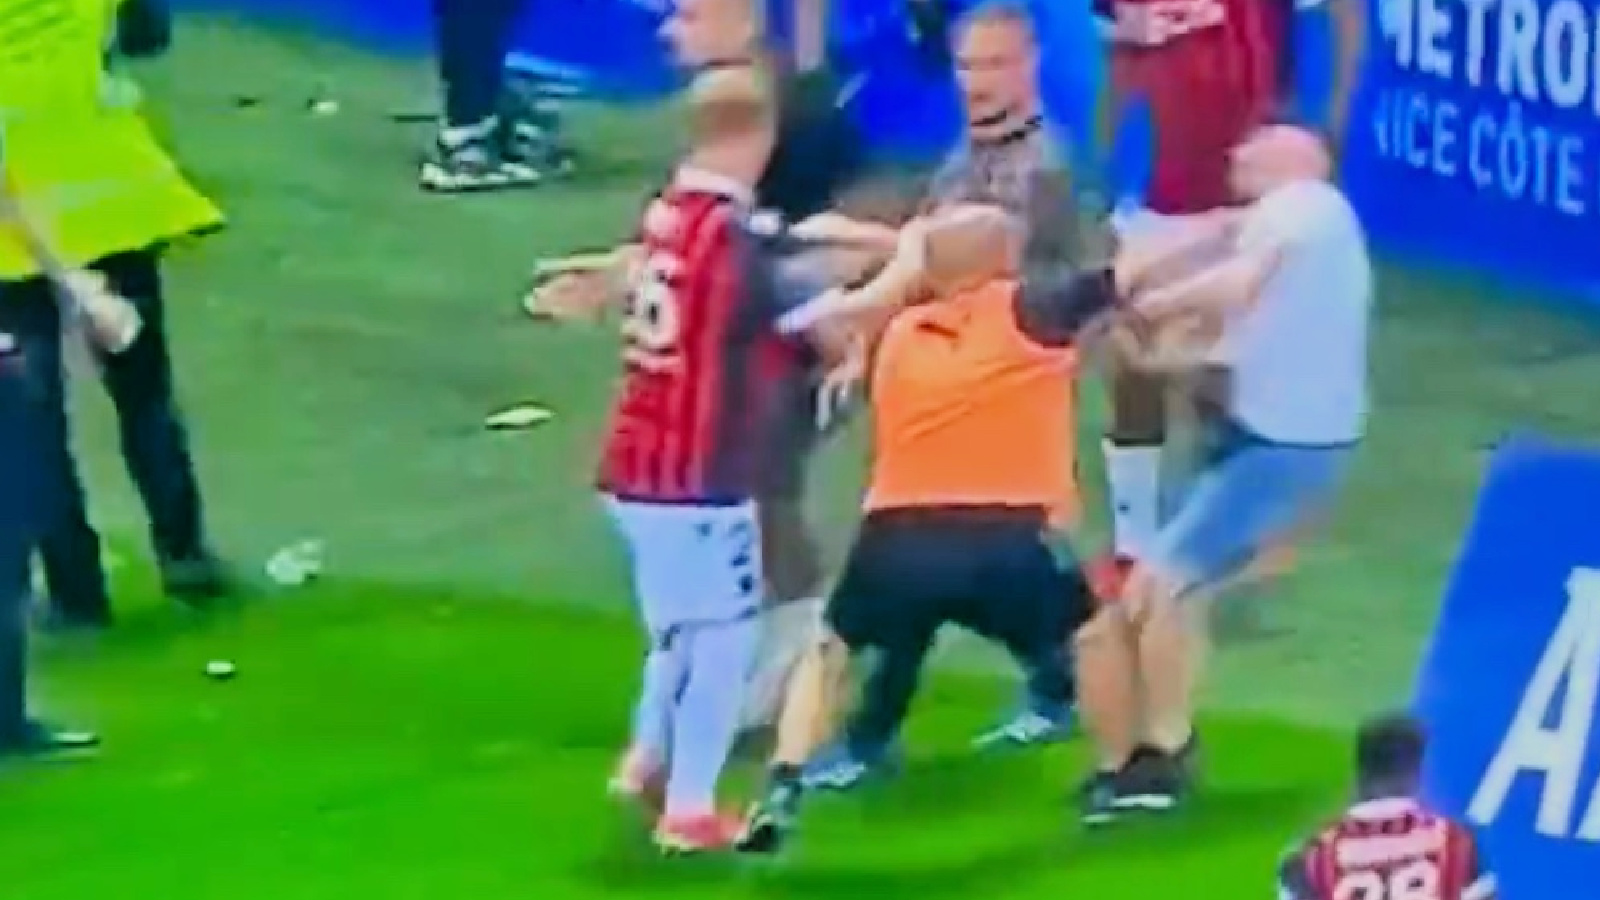 Brutal moment a Marseille coach knocks out pitch invader with single punch